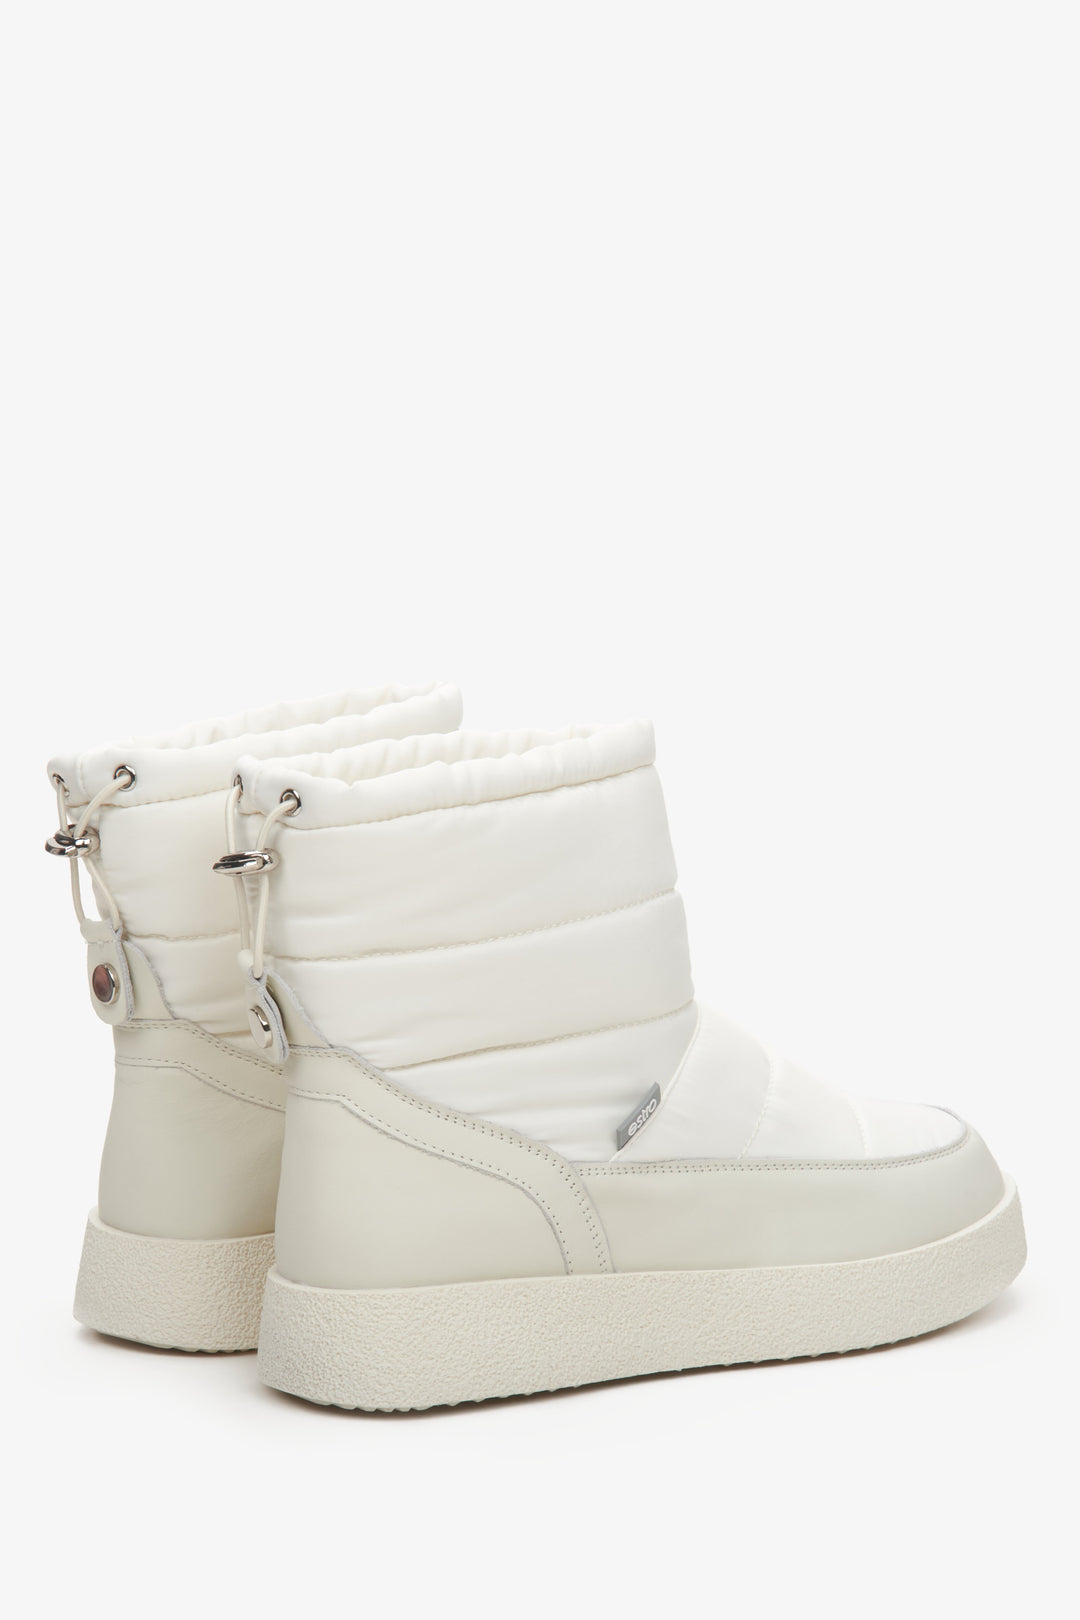 Women's snow boots in light beige made of genuine leather and fur - close-up on the side line and heel.